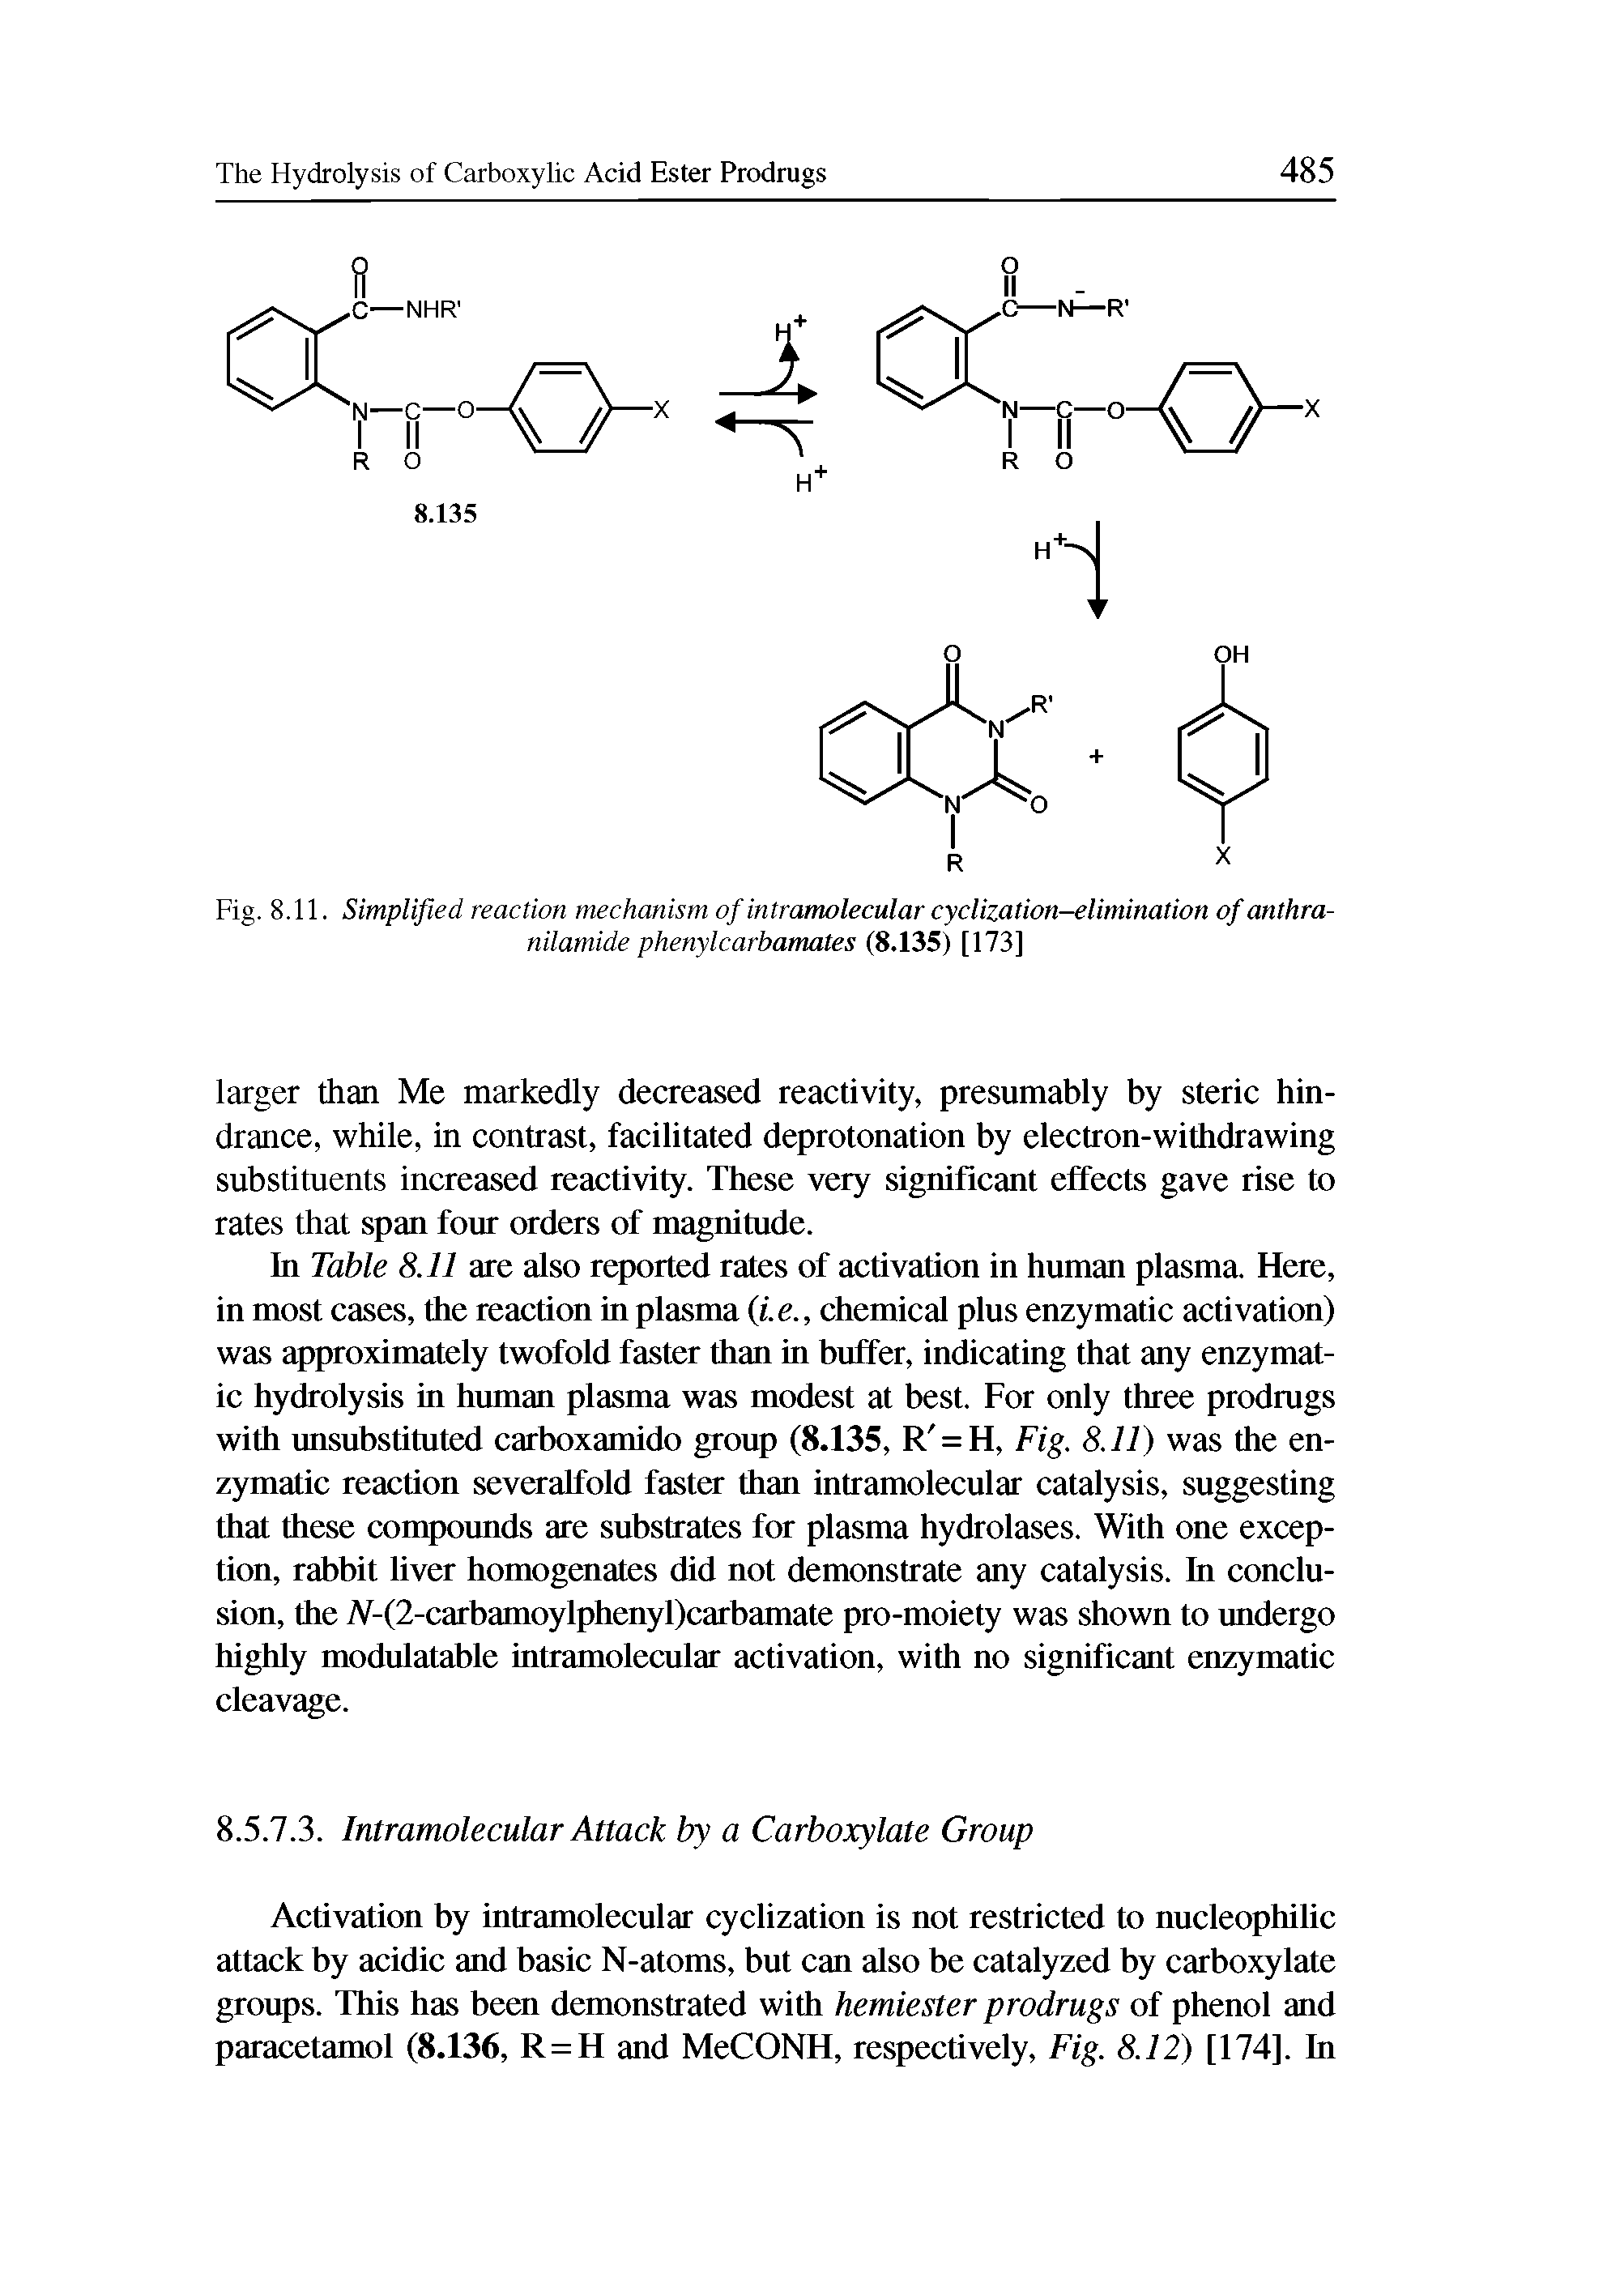 Fig. 8.11. Simplified reaction mechanism of intramolecular cyclization-elimination of anthra-nilamide phenylcarbamates (8.135) [173]...